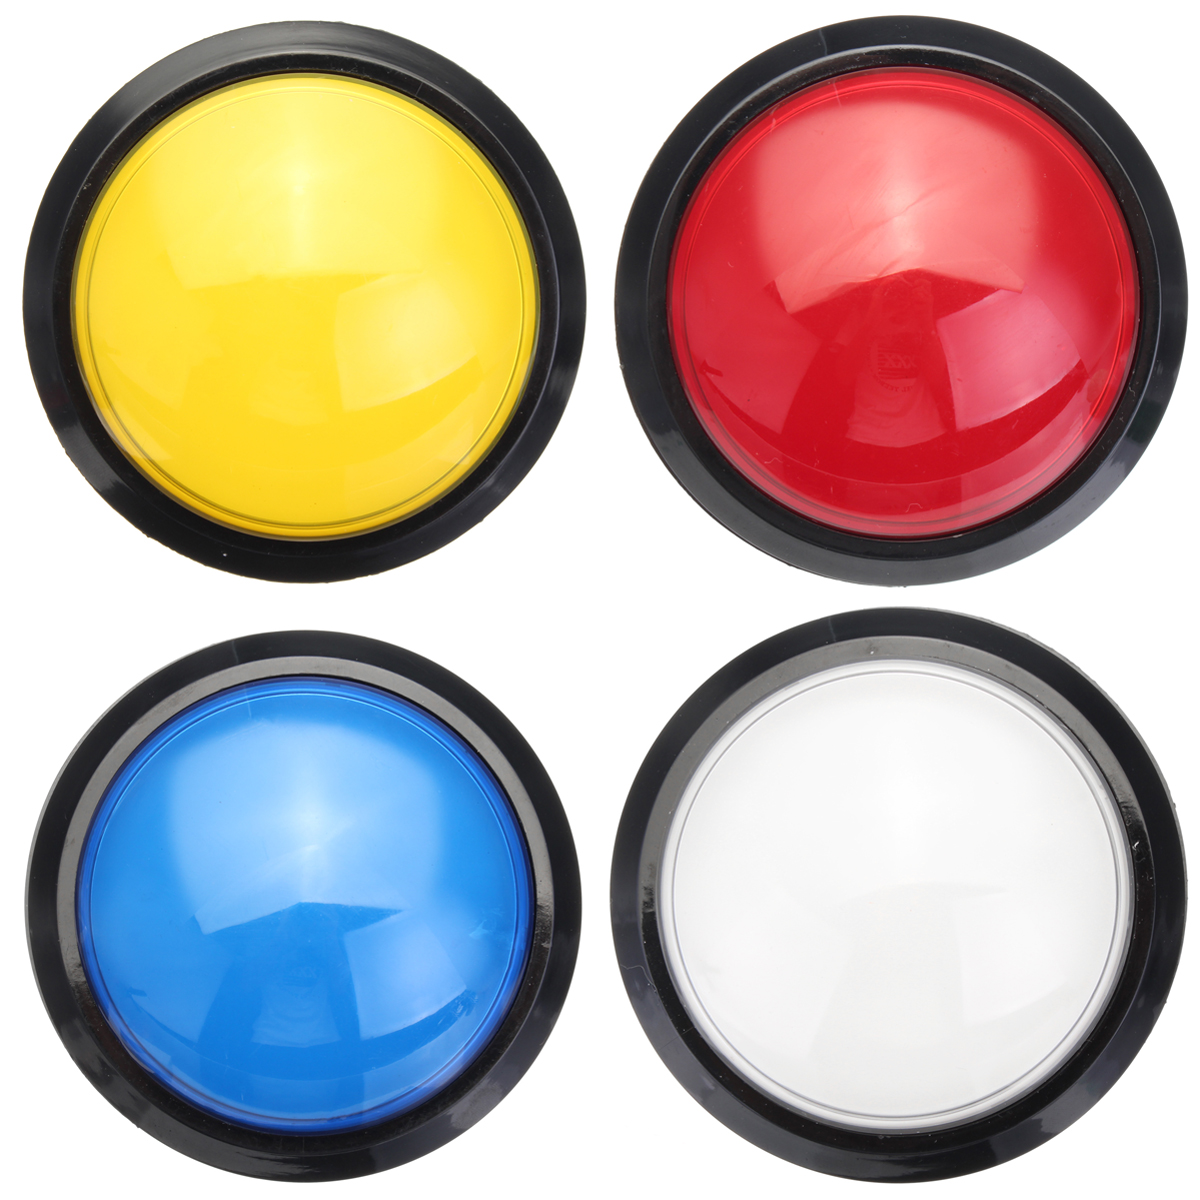 100mm Massive Arcade Button with LED Convexity Console Replacement Button 20